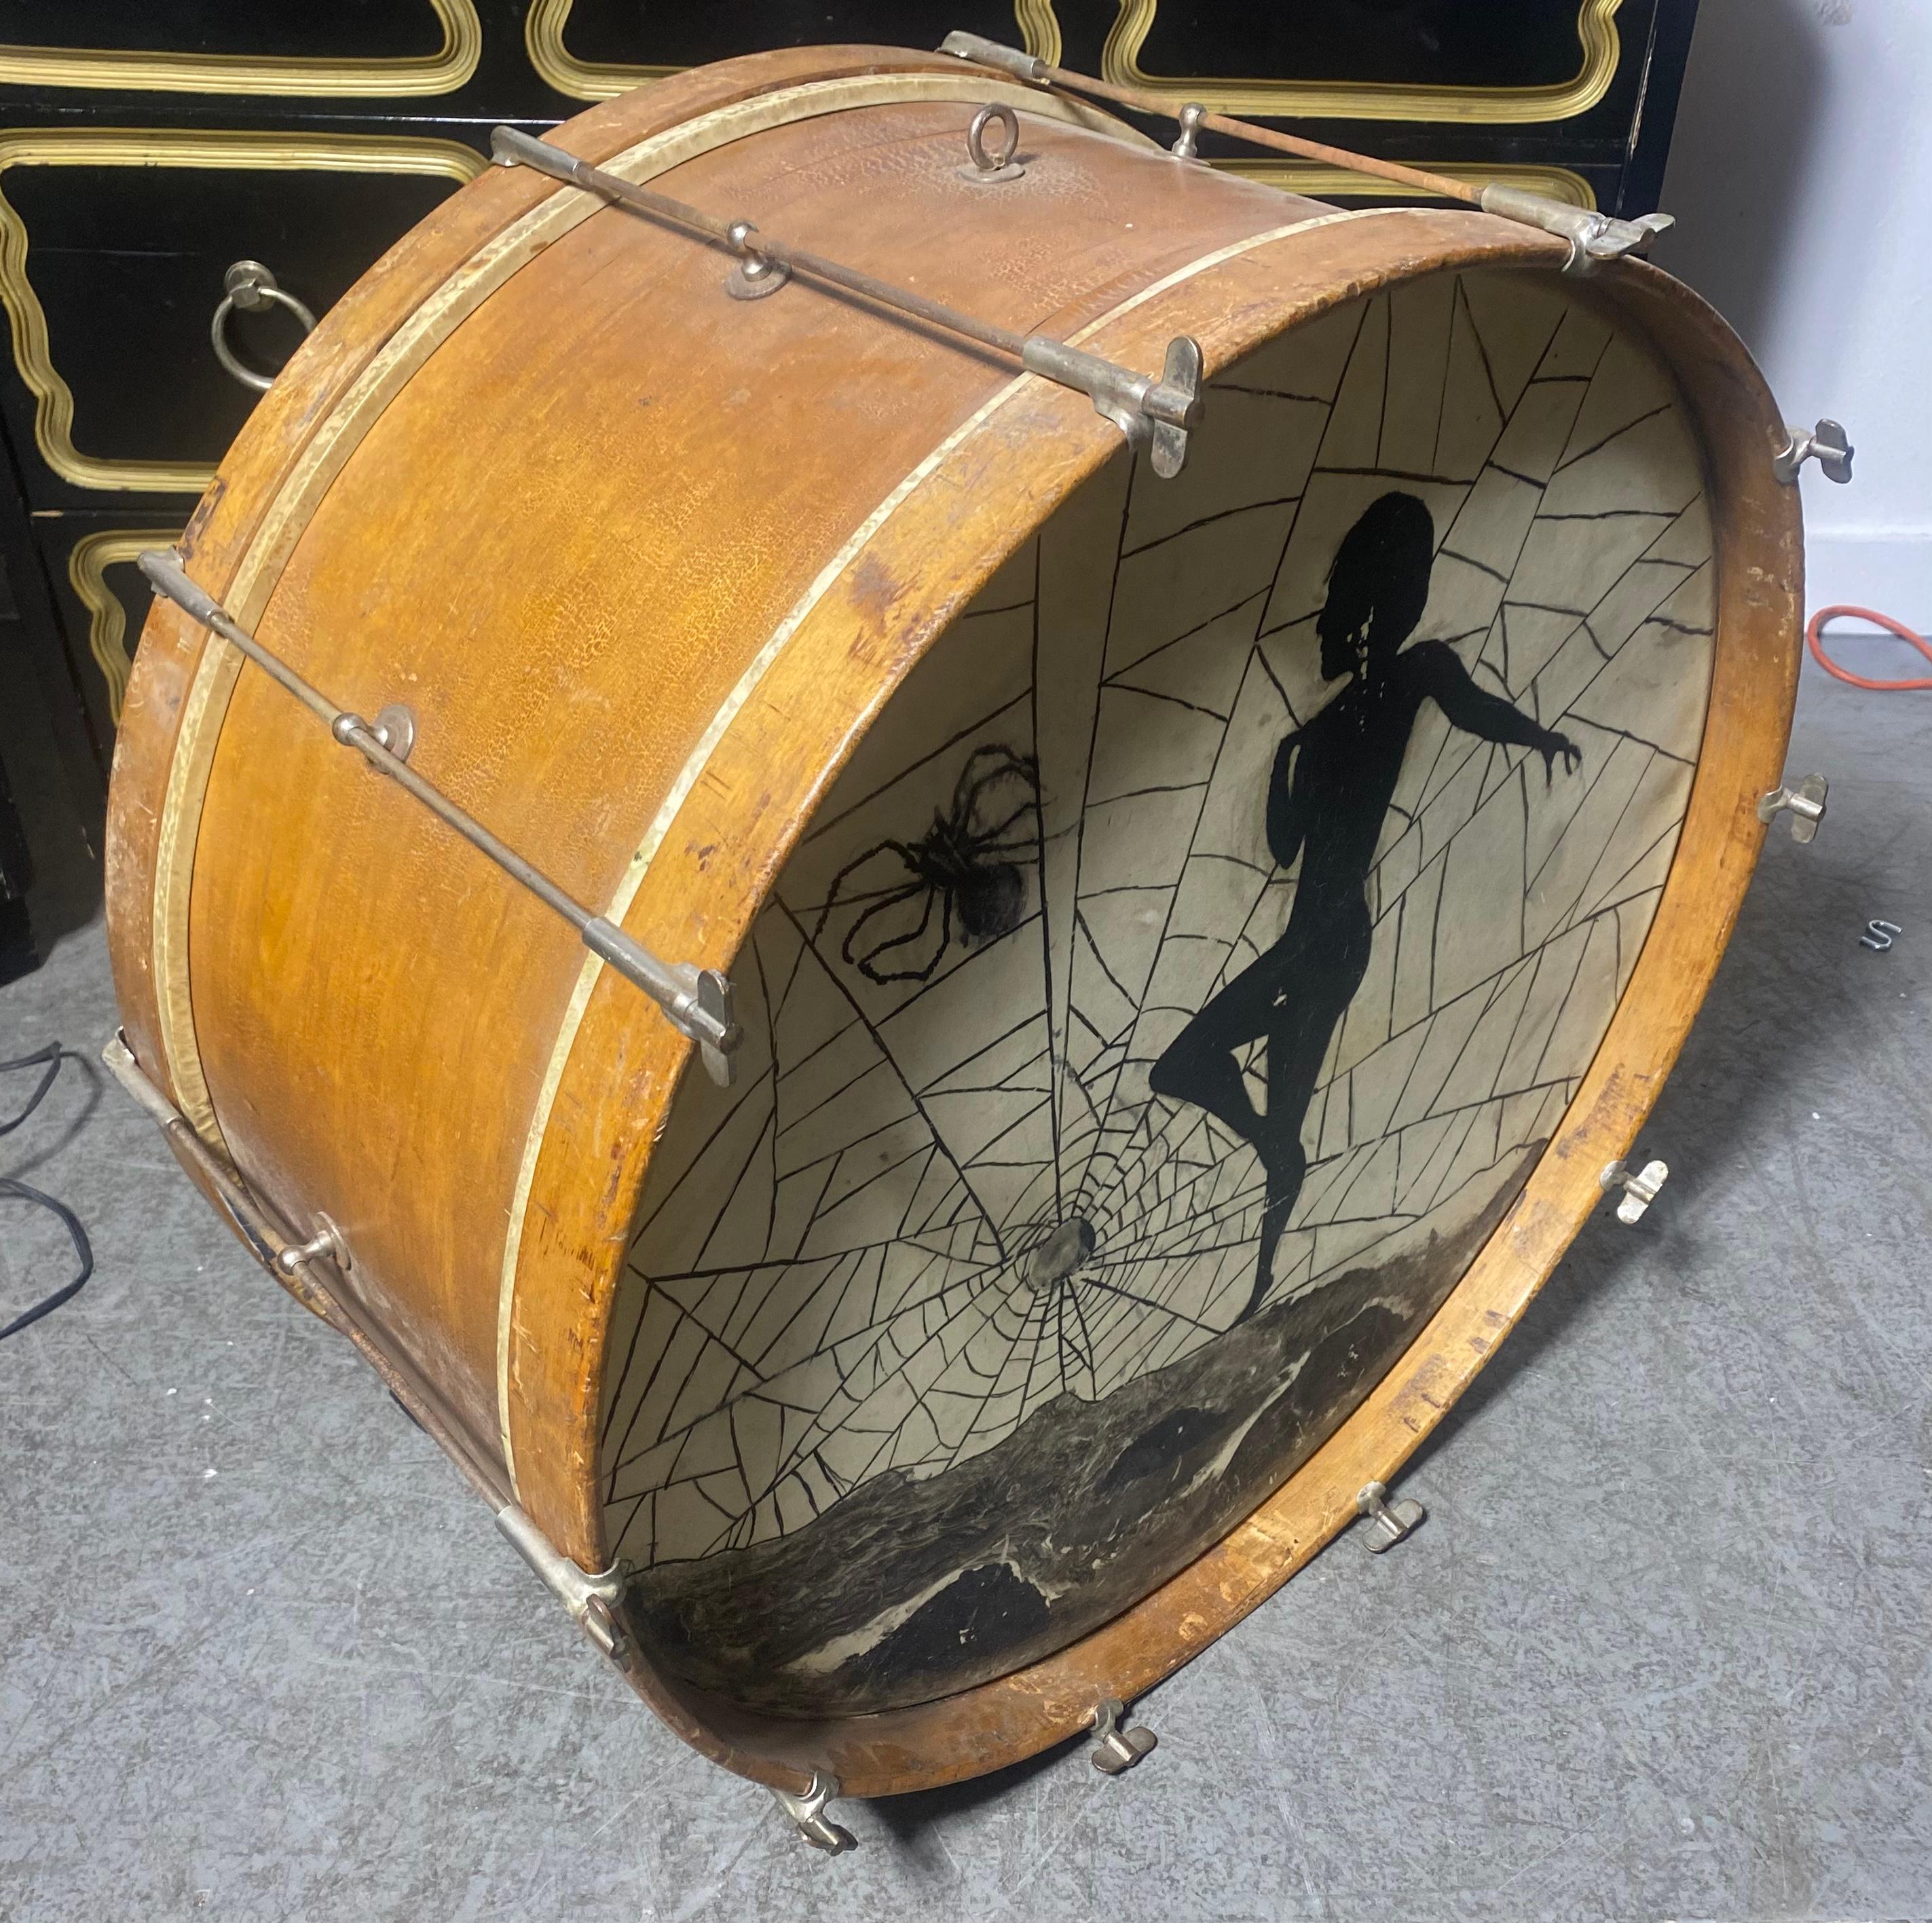 Wonderful 1920s Ludwig & Ludwig Bass Drum / lamp, Folk Art,, Hand painted Art Deco woman figure,,spider web and spider.Collectable drum and an amazing piece of art,,